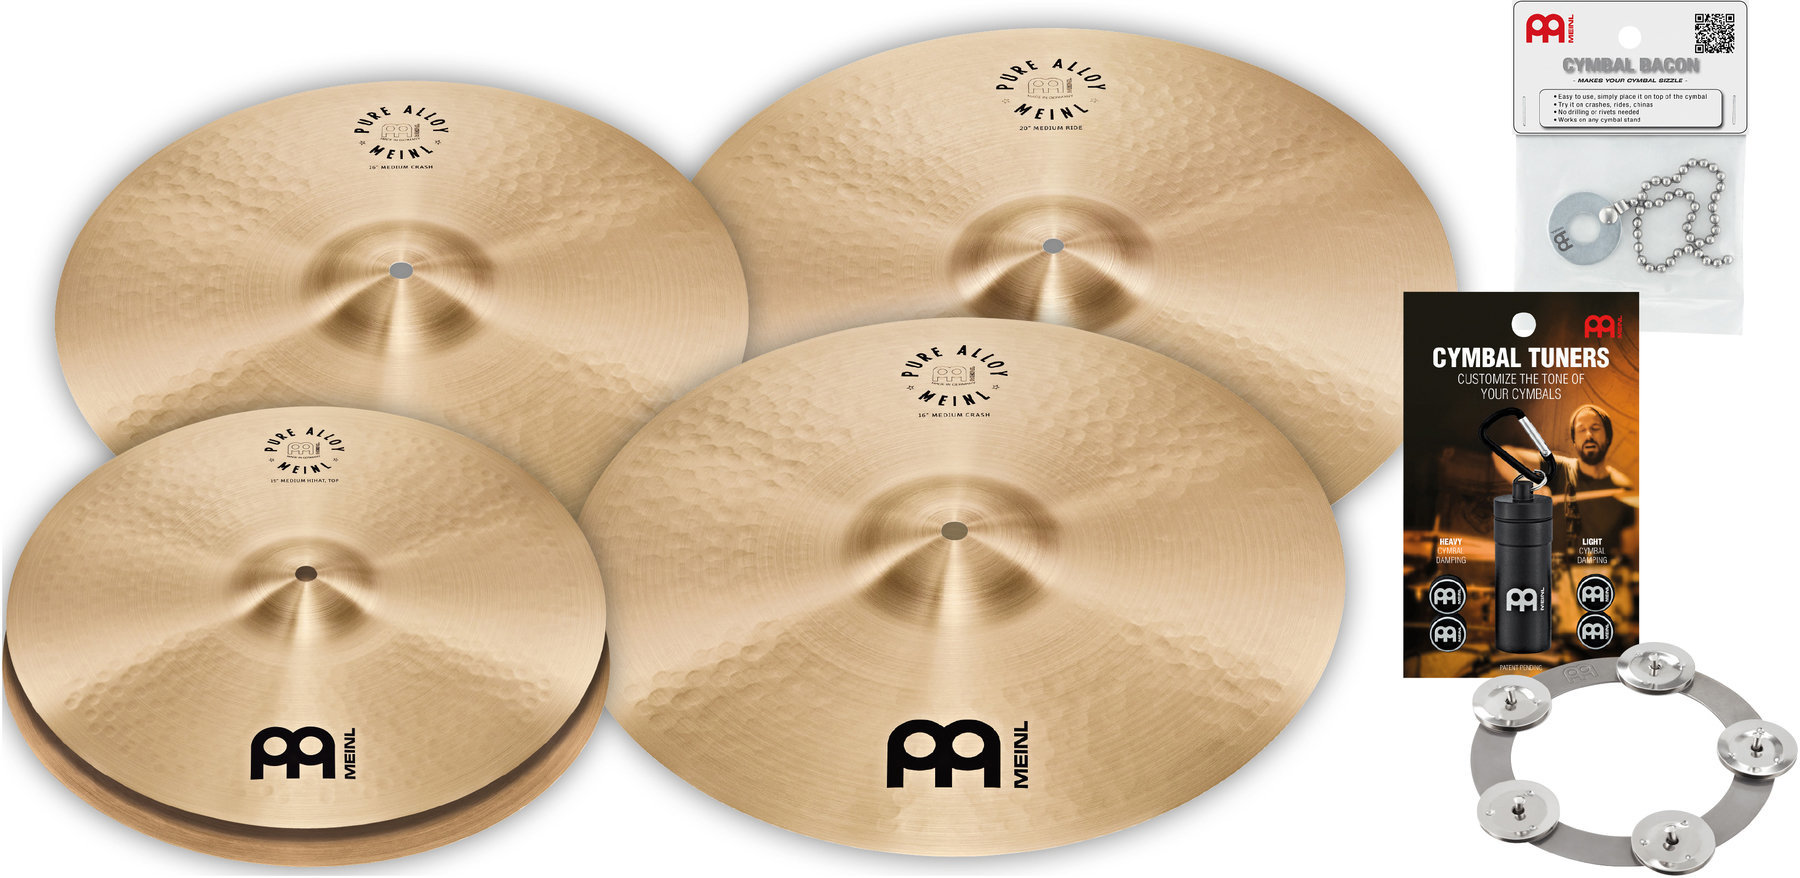 Cymbal-sats Meinl PA14161820M Pure Alloy complete cymbal set